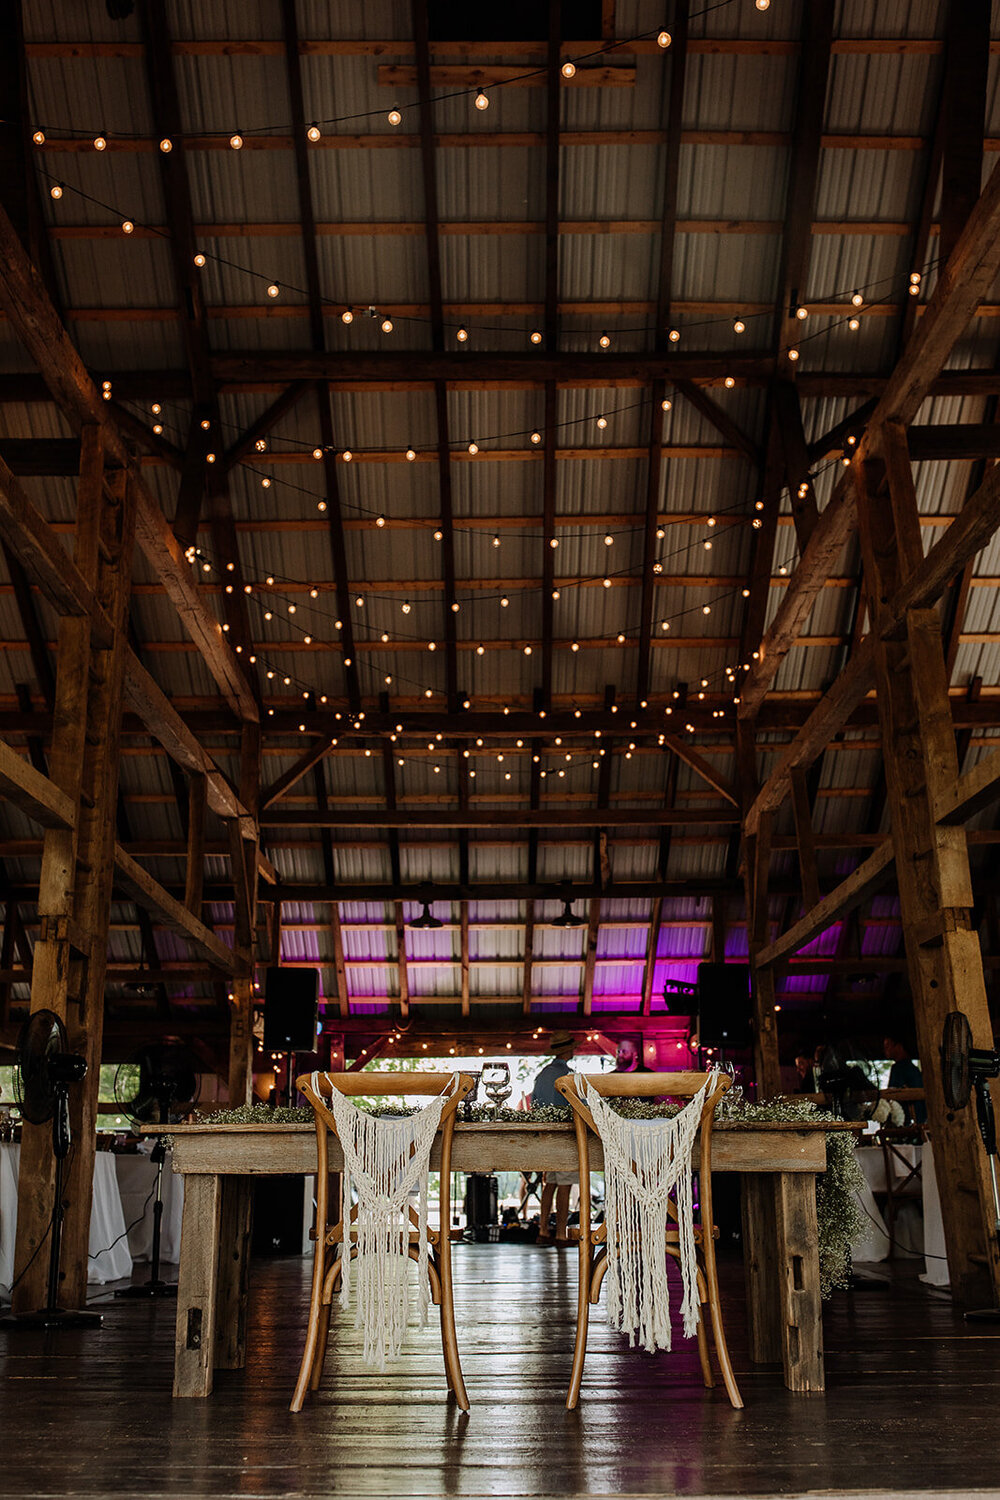 meyers-farm-bakery-and-events-wedding-venue-quakertown-pa-reception